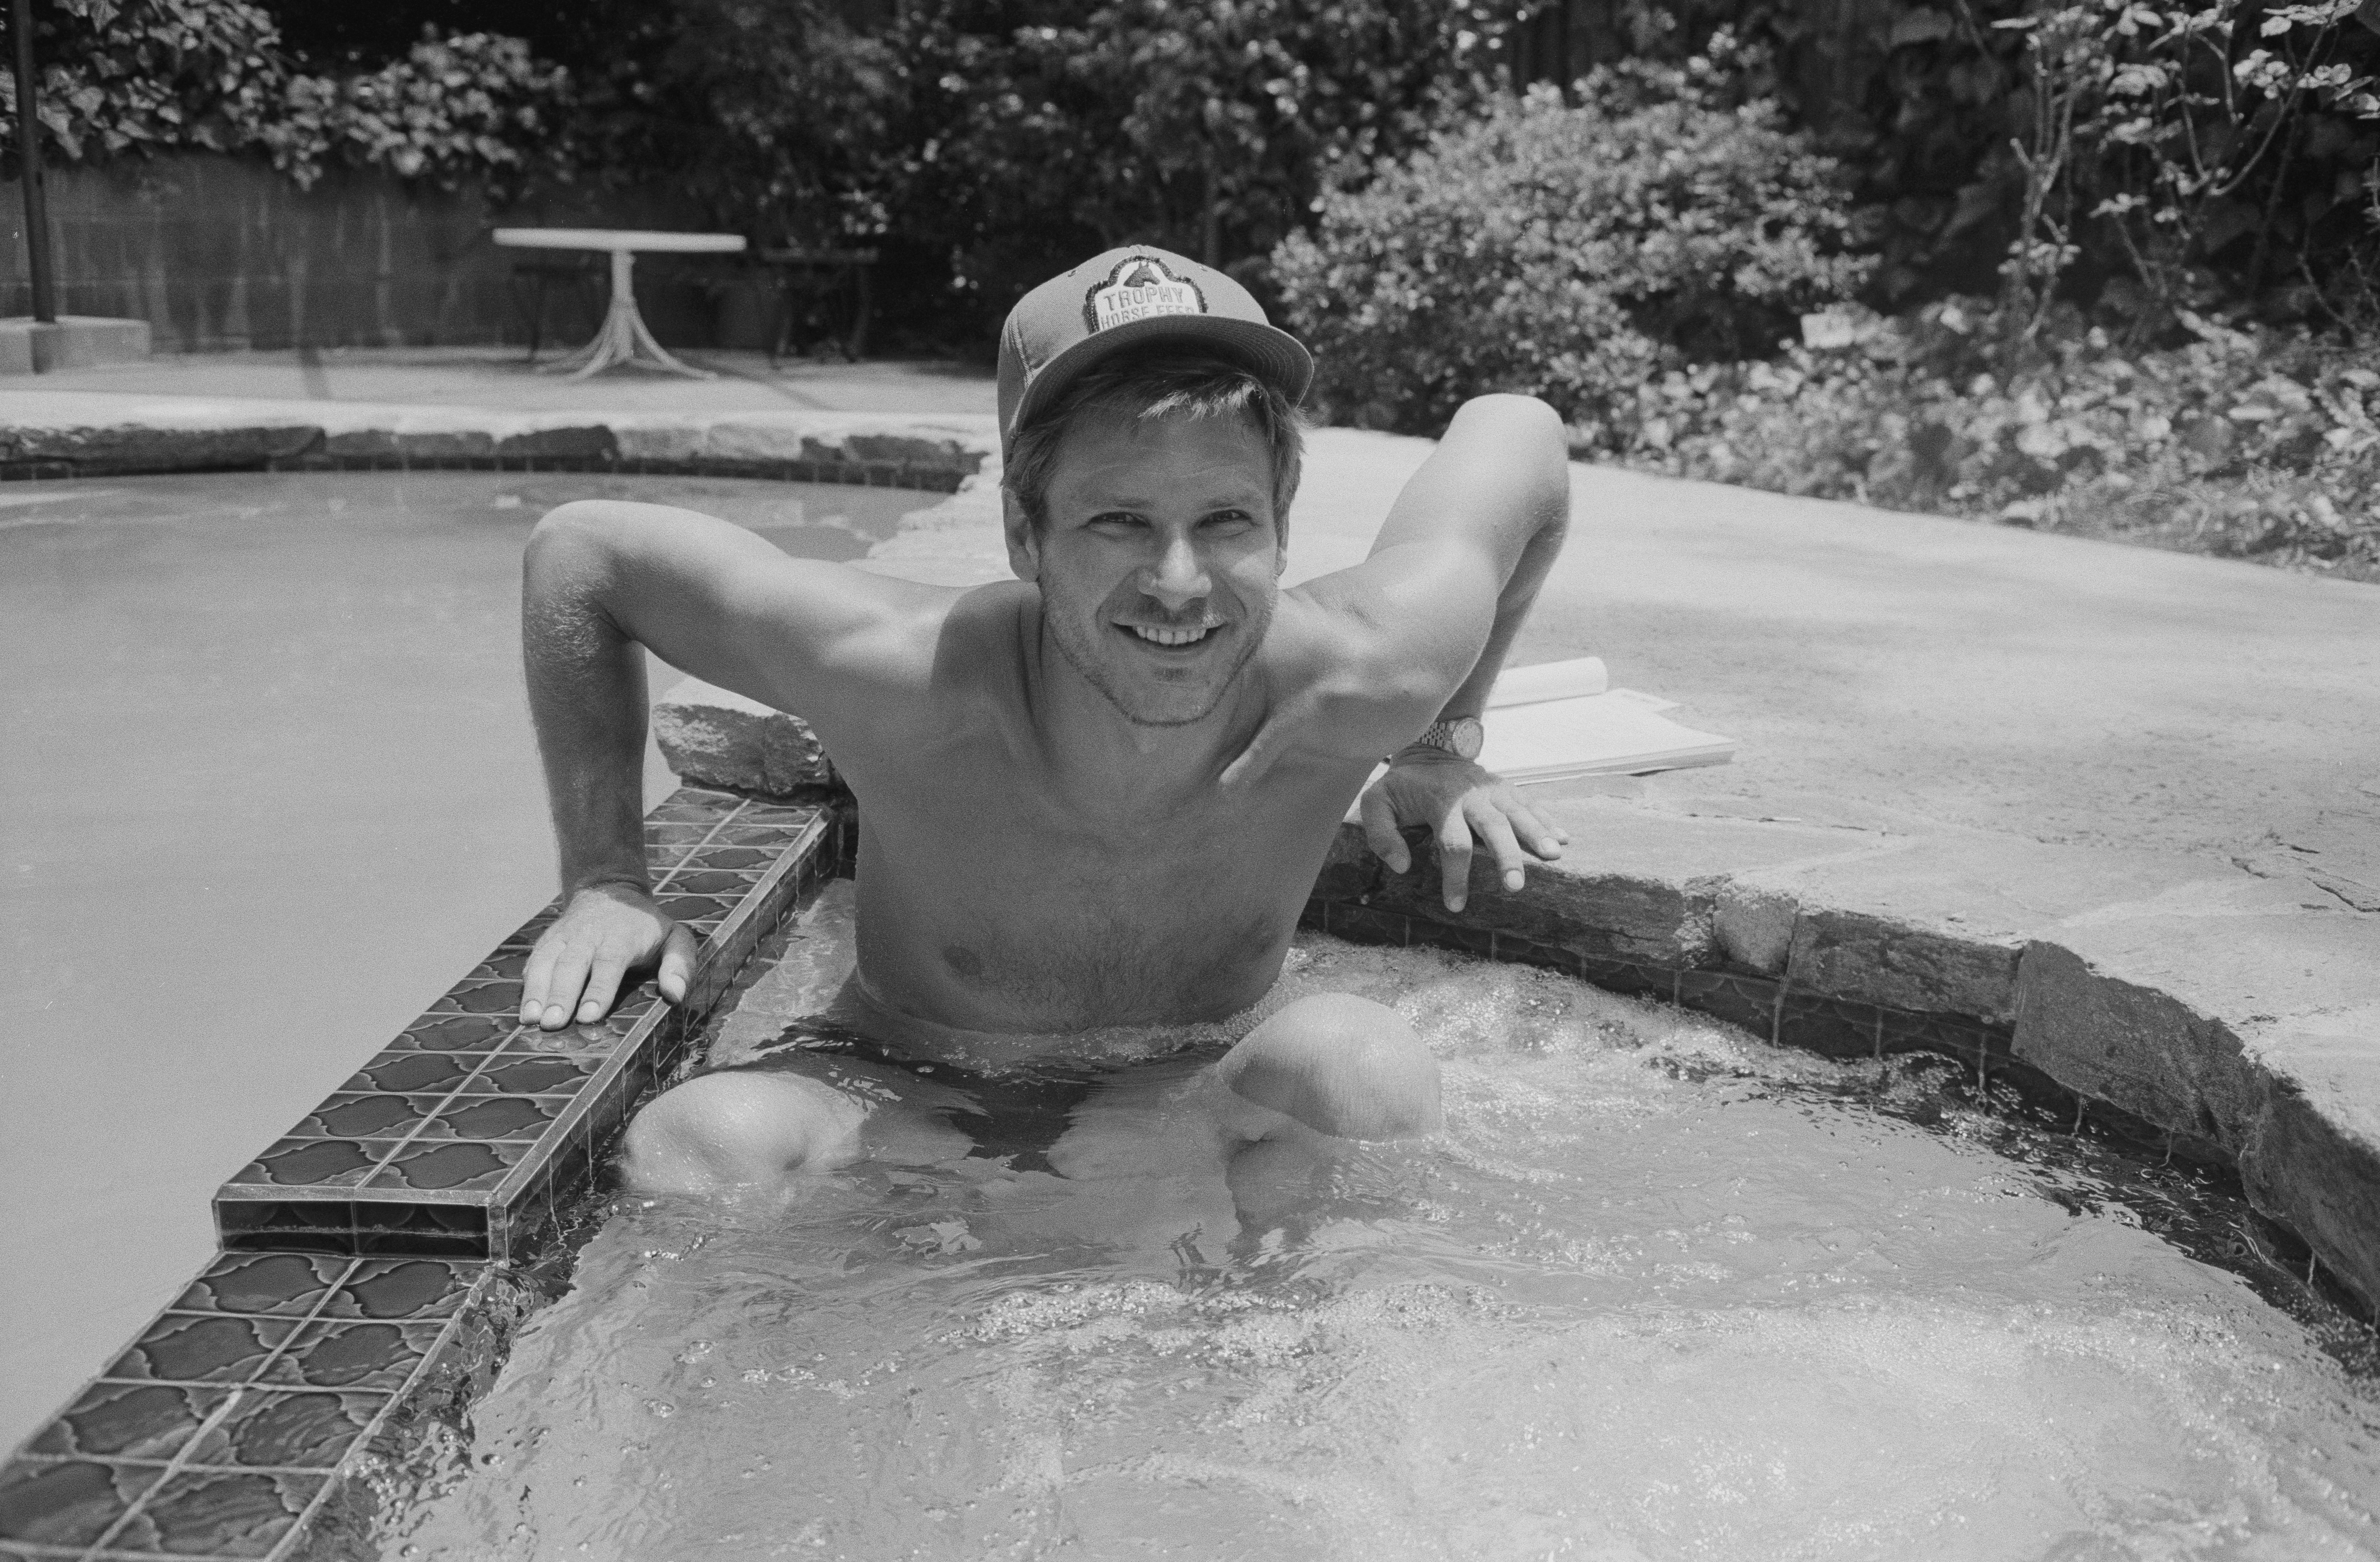 Harrison Ford in his Los Angeles home on March 10, 1981 | Source: Getty Images